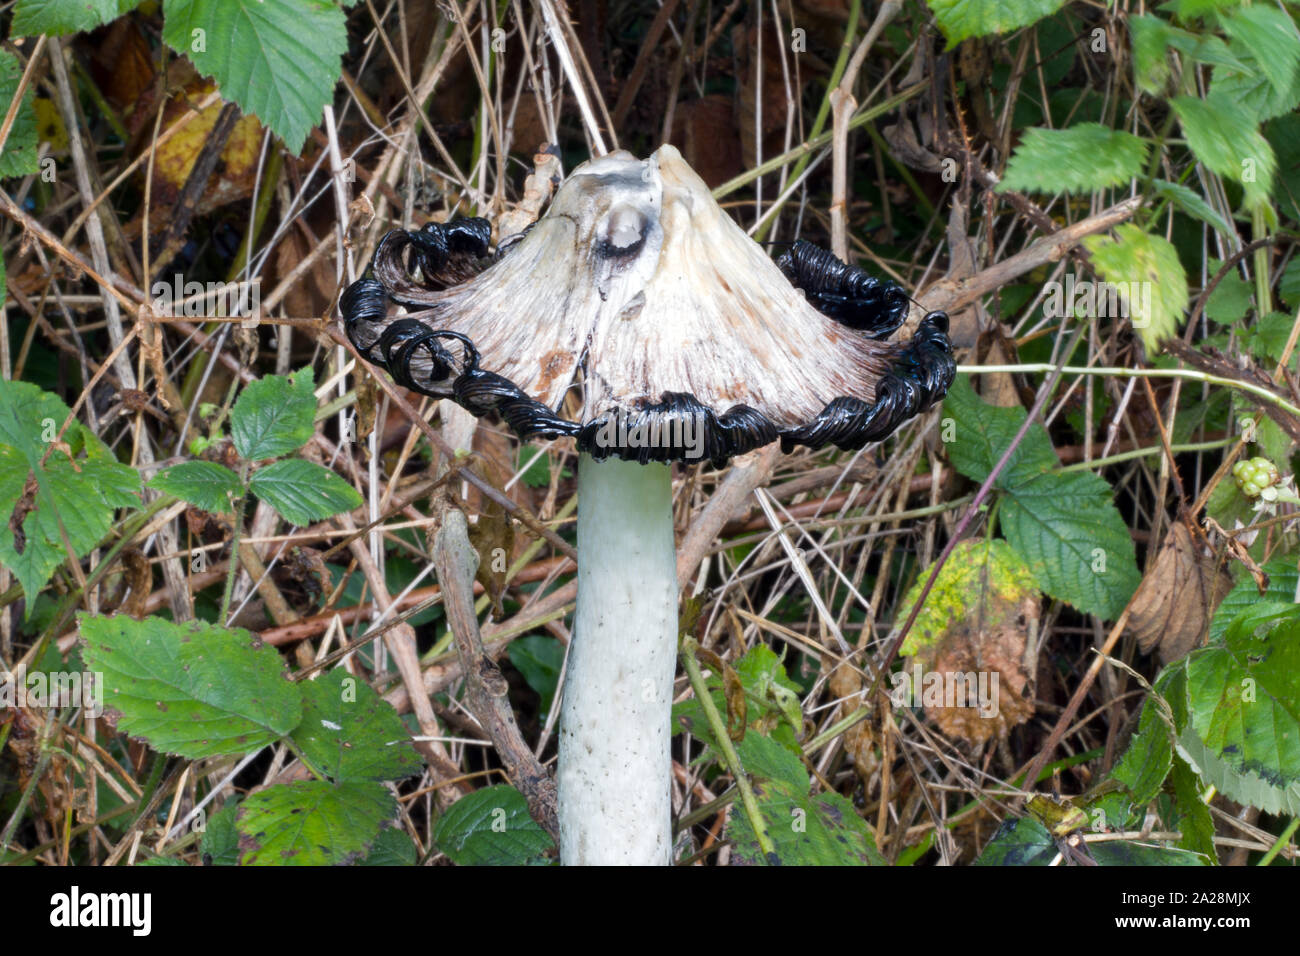 Coprinus comatus (shaggy ink cap) is a common fungus often found in meadows, woods and roadside verges. It secretes black liquid filled with spores. Stock Photo